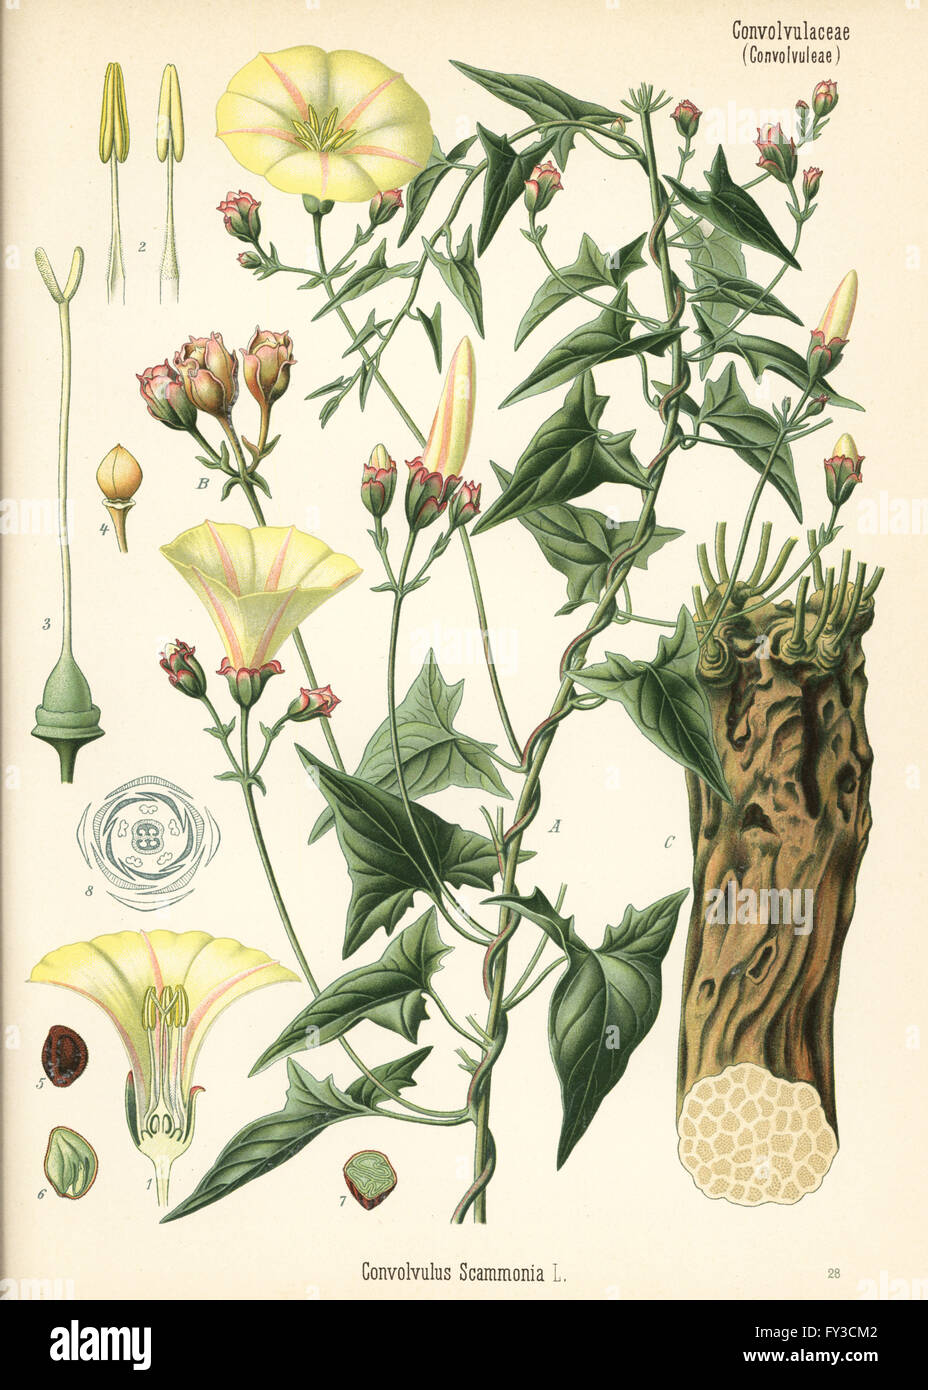 Scammony bindweed, Convolvulus scammonia. Chromolithograph after a botanical illustration from Hermann Adolph Koehler's Medicinal Plants, edited by Gustav Pabst, Koehler, Germany, 1887. Stock Photo